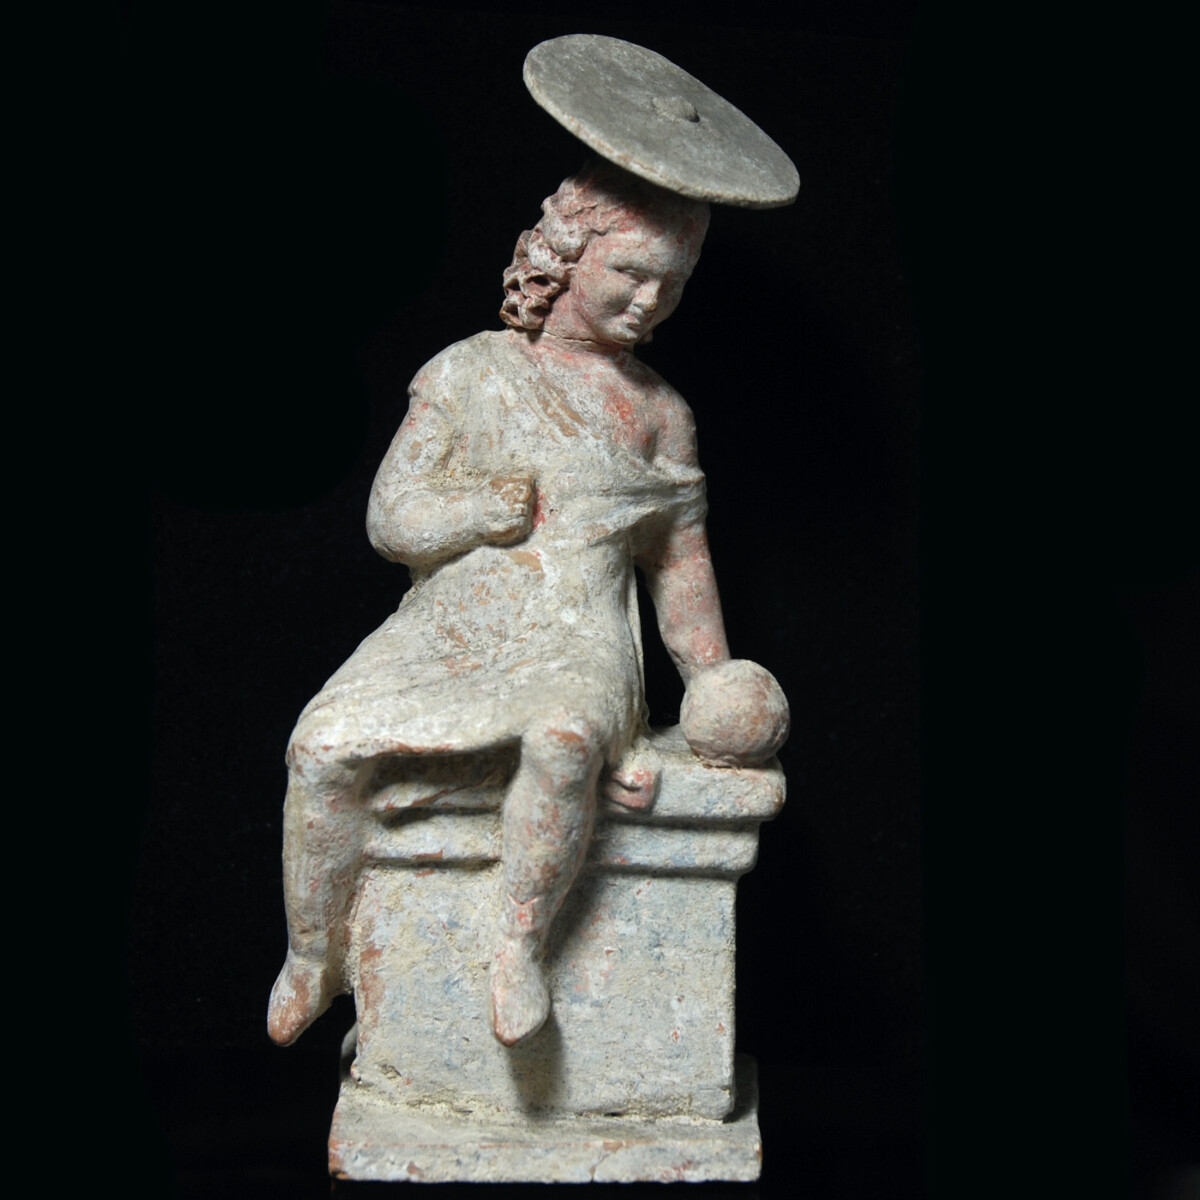 Hellenistic Tanagra statuette of a girl with sun hat and ball